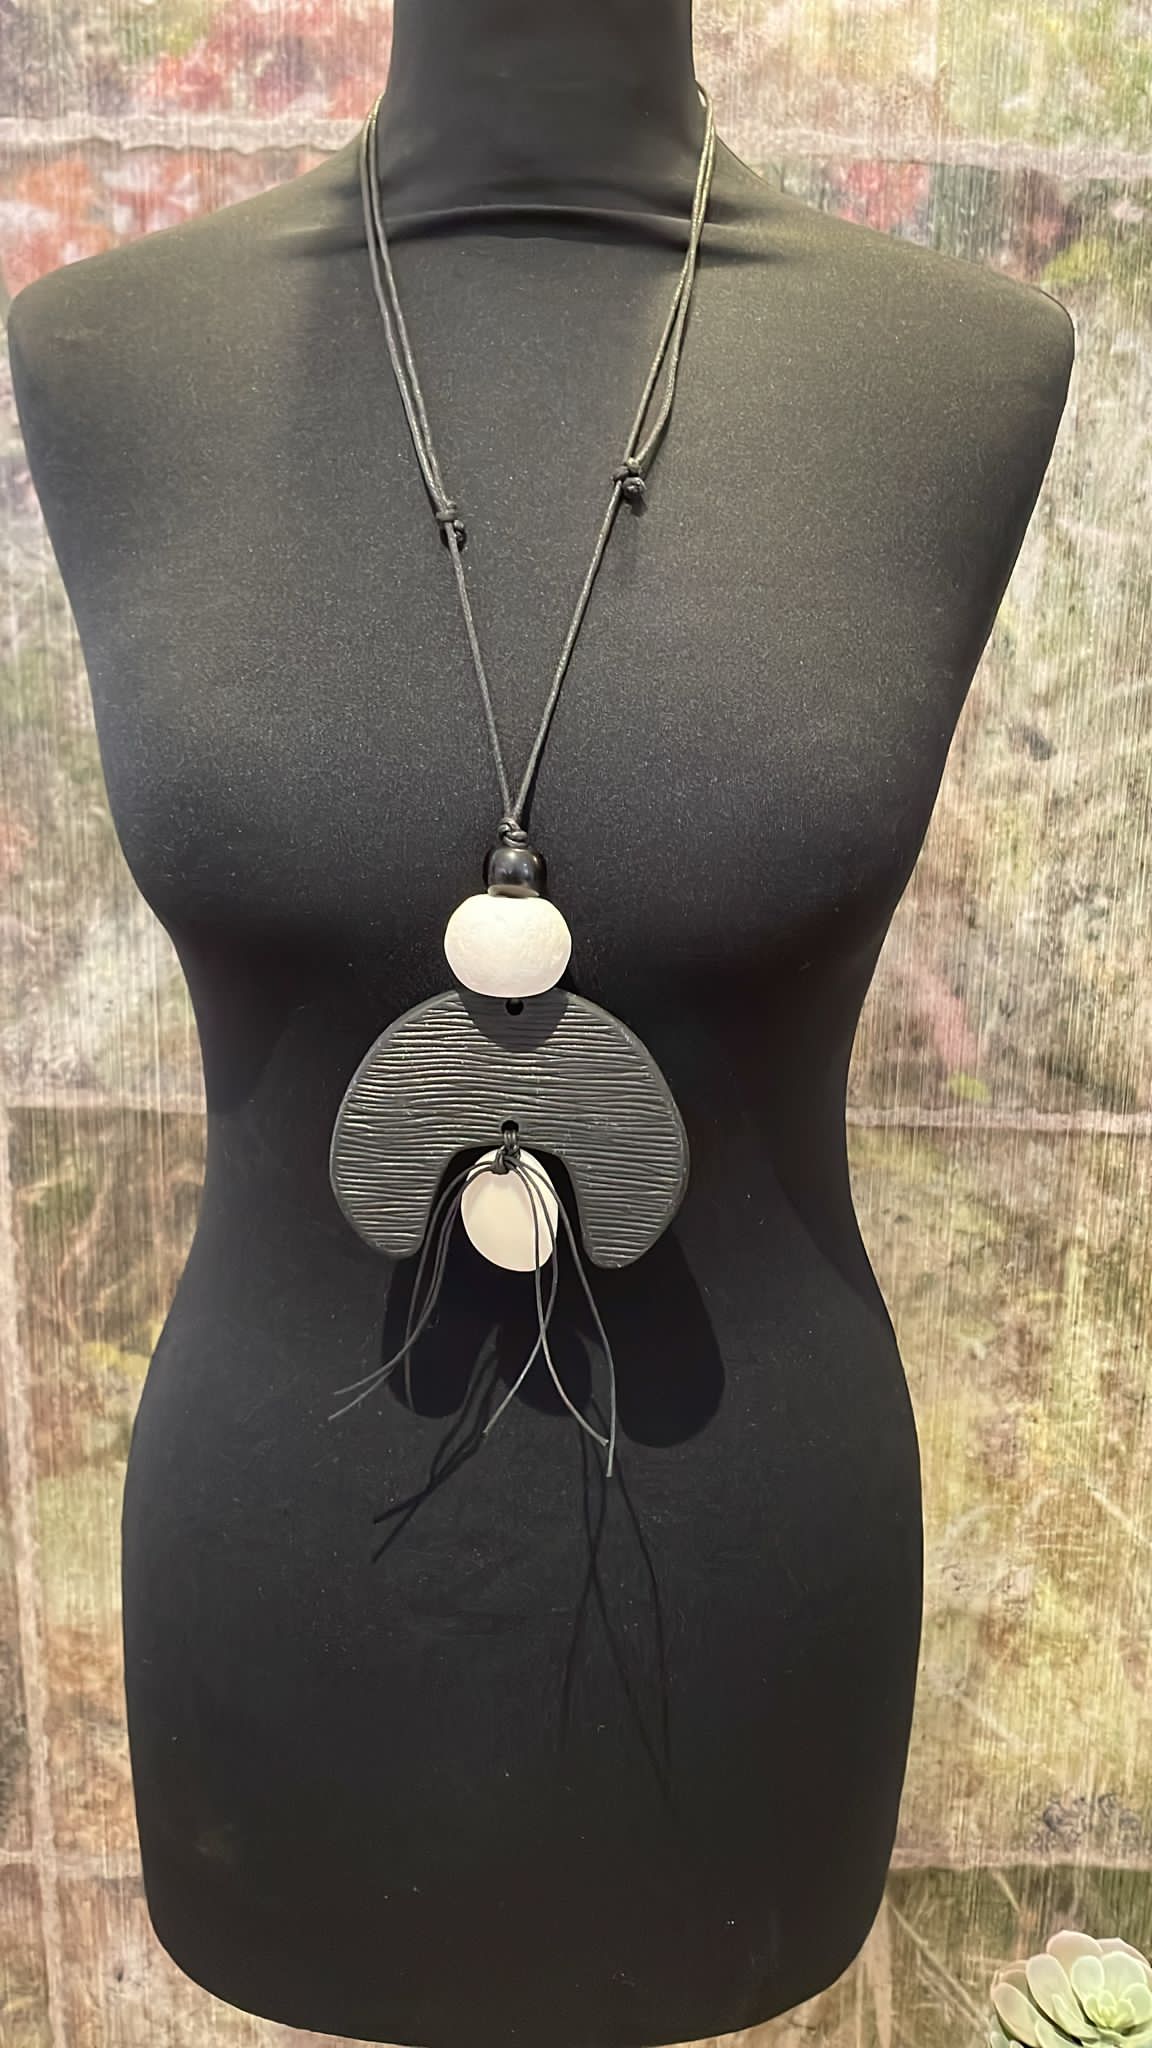 String Trim Two Tone Necklace in Black/White